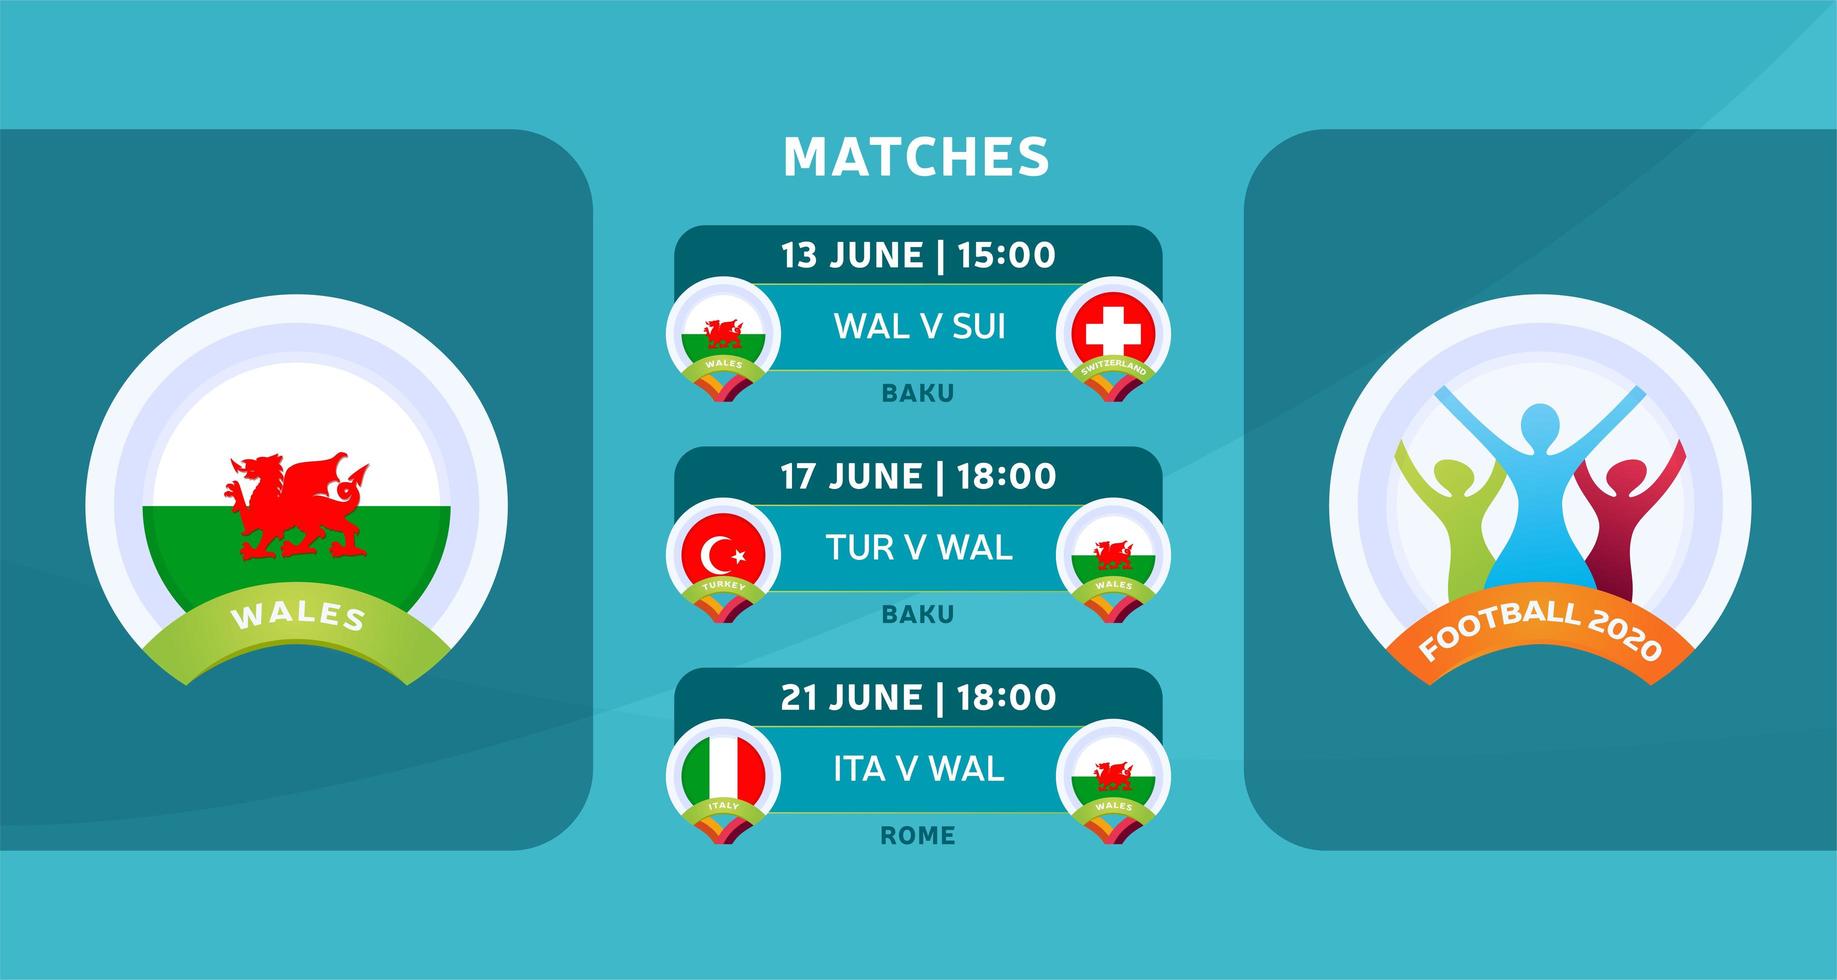 Schedule of matches of the Wales national team in the final stage at the European Football Championship 2020. Vector illustration with the official gravel of football matches.